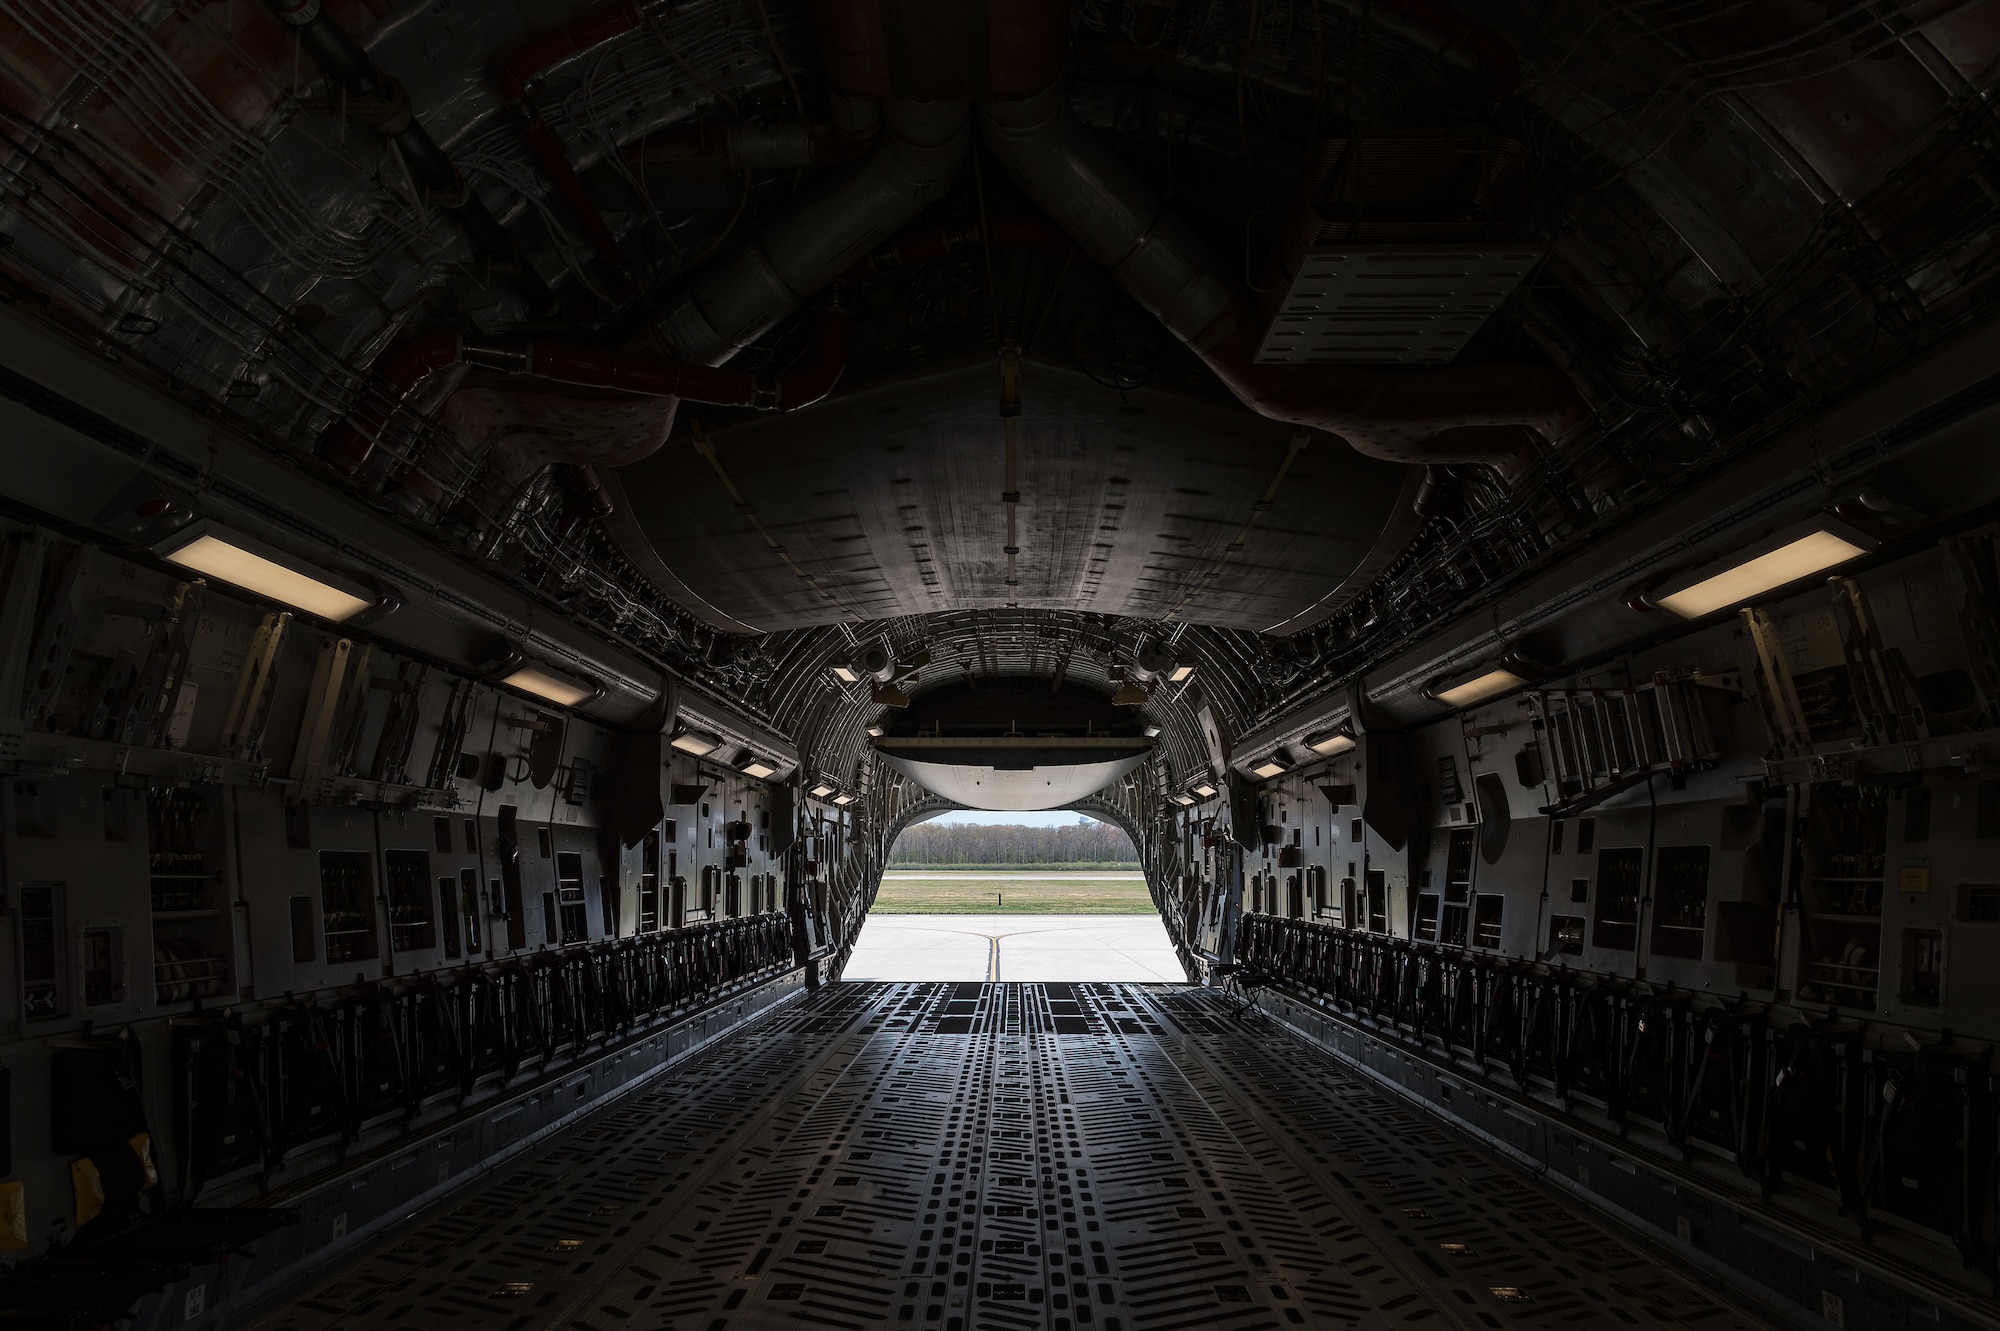 The ramp of a C-17 Globemaster III is positioned in the drive-in mode on Dover Air Force Base, Delaware, April 7, 2021. The C-17 is capable of rapid strategic delivery of troops and all types of cargo to main operating bases or directly to forward bases around the world. (U.S. Air Force photo by Roland Balik)